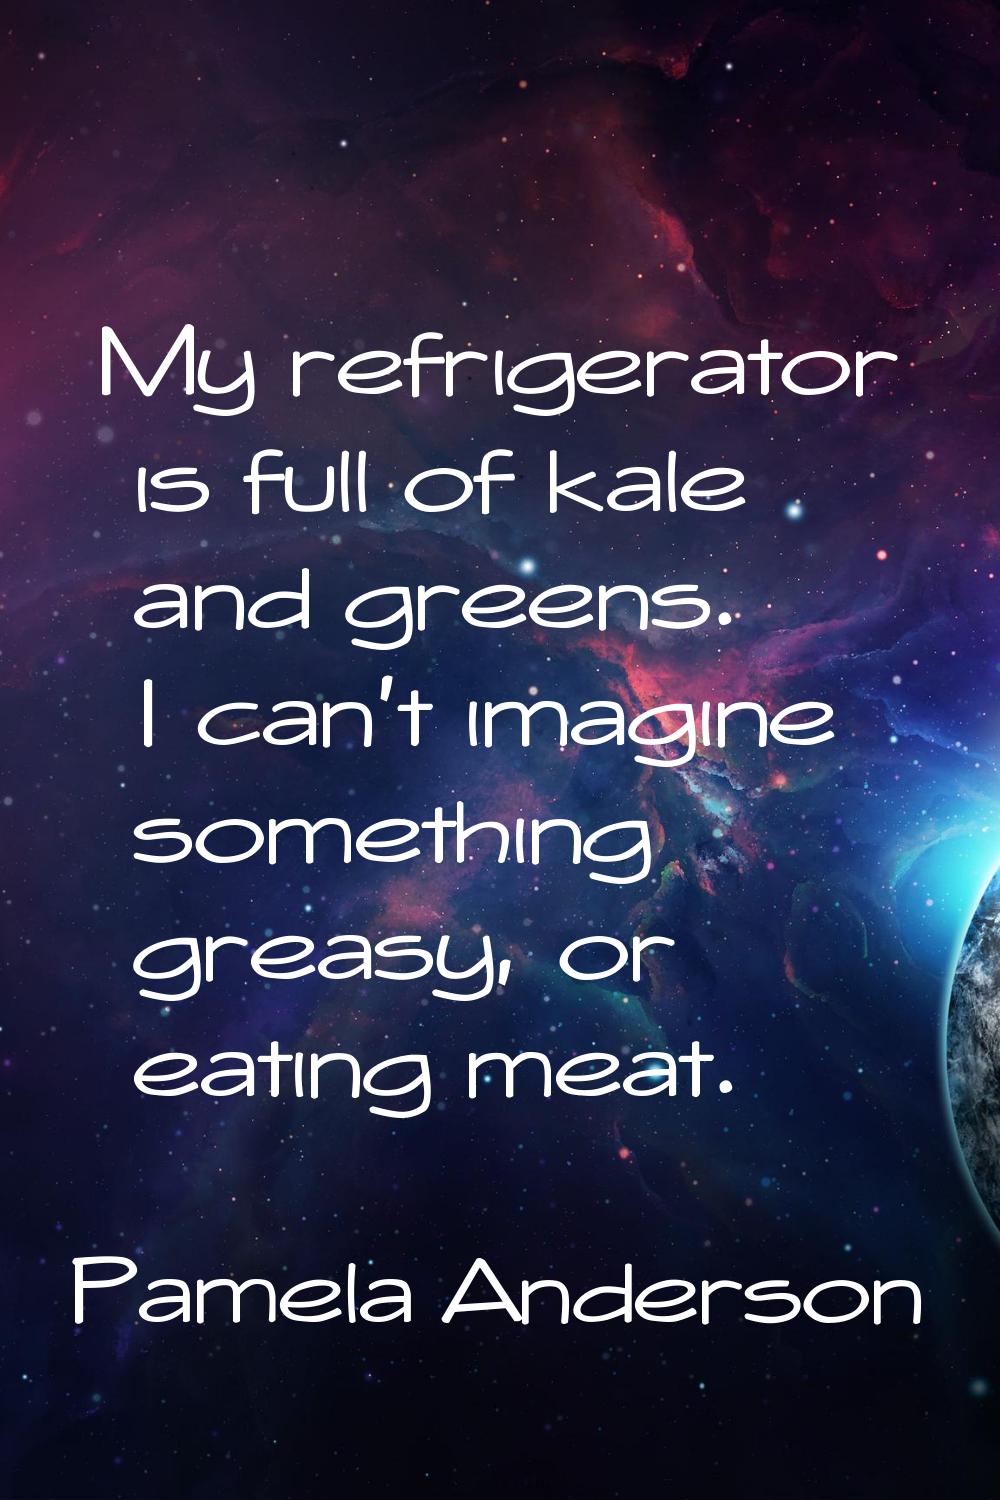 My refrigerator is full of kale and greens. I can't imagine something greasy, or eating meat.